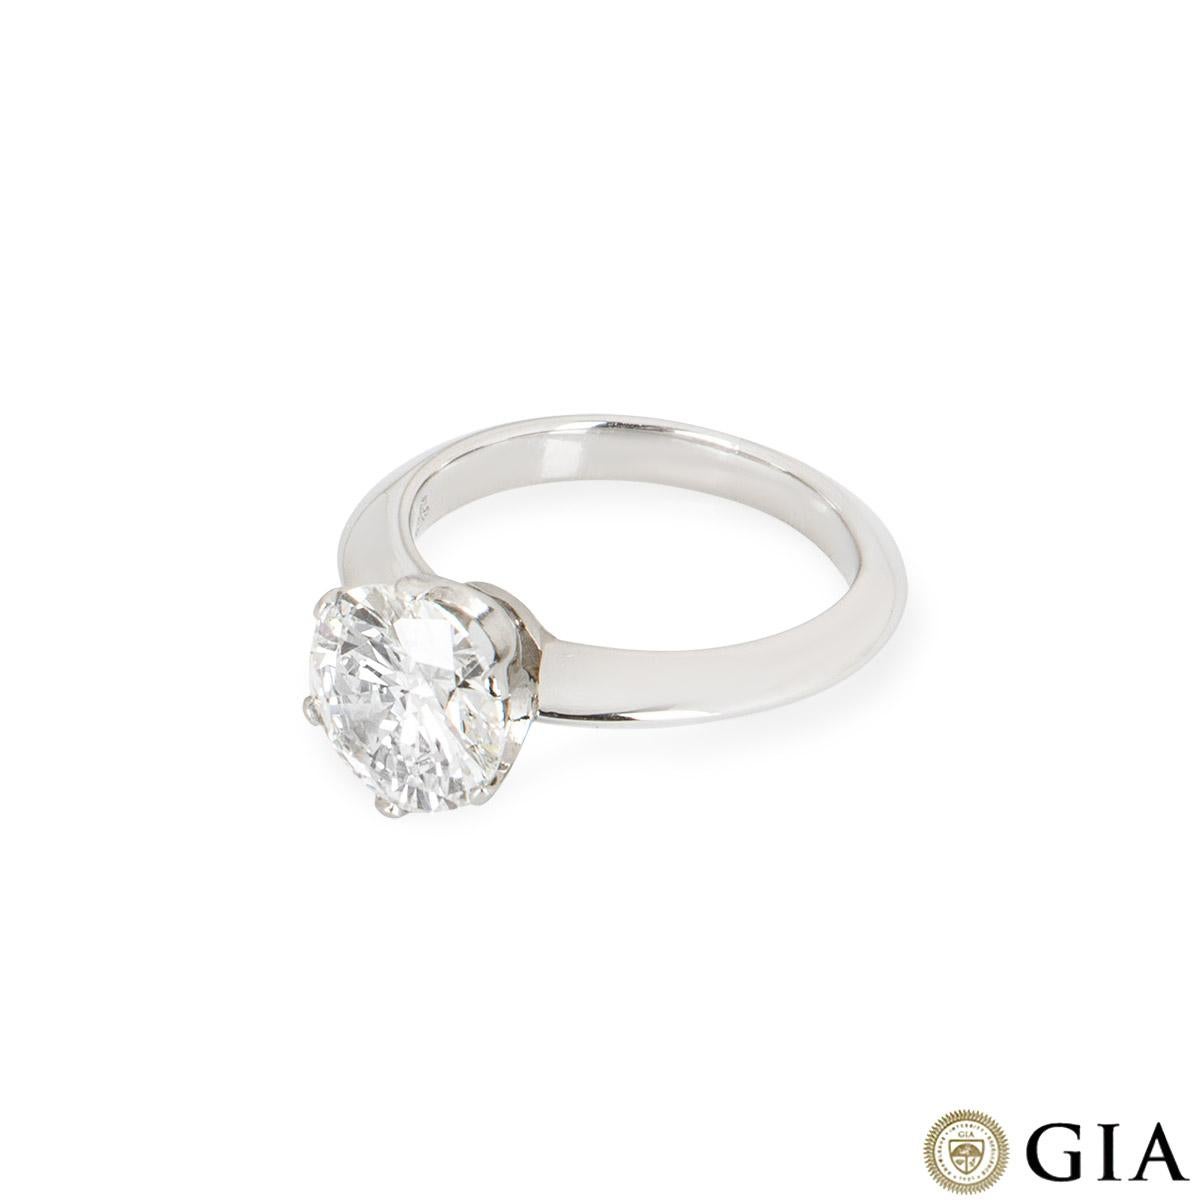 GIA Certed Platinum Round Brilliant Cut Diamond Ring 2.01ct G/SI2 In Excellent Condition For Sale In London, GB